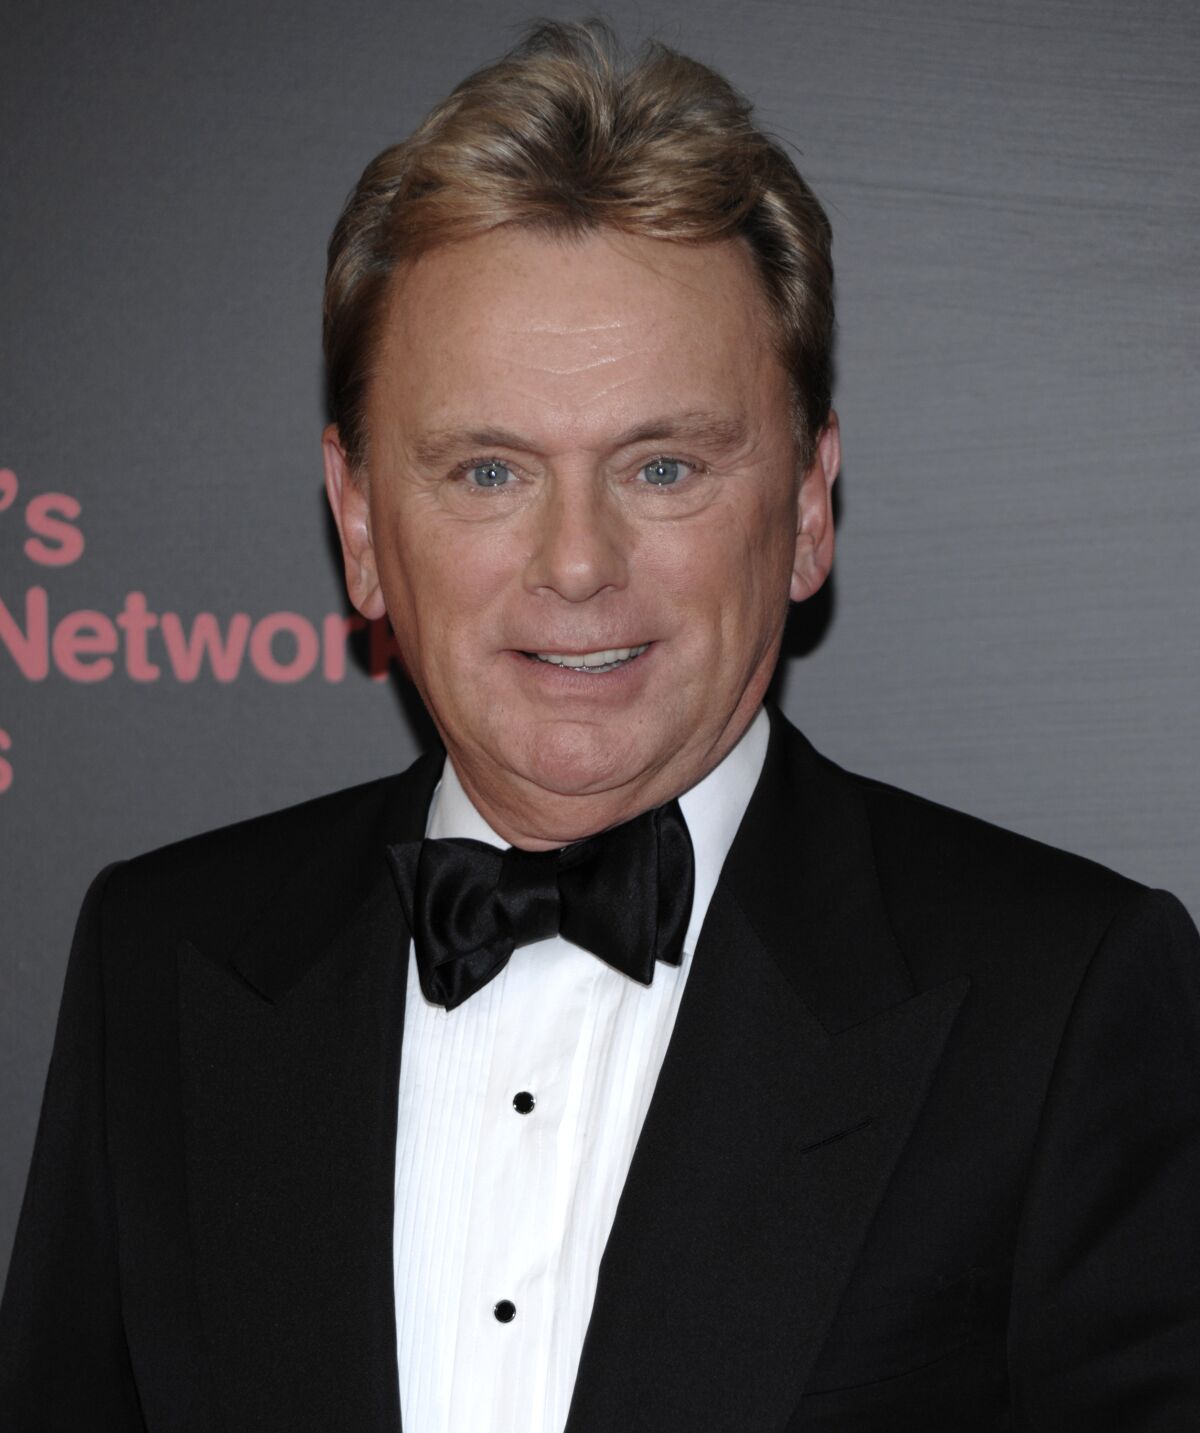 Pat Sajak in a black tuxedo arrives at an event.